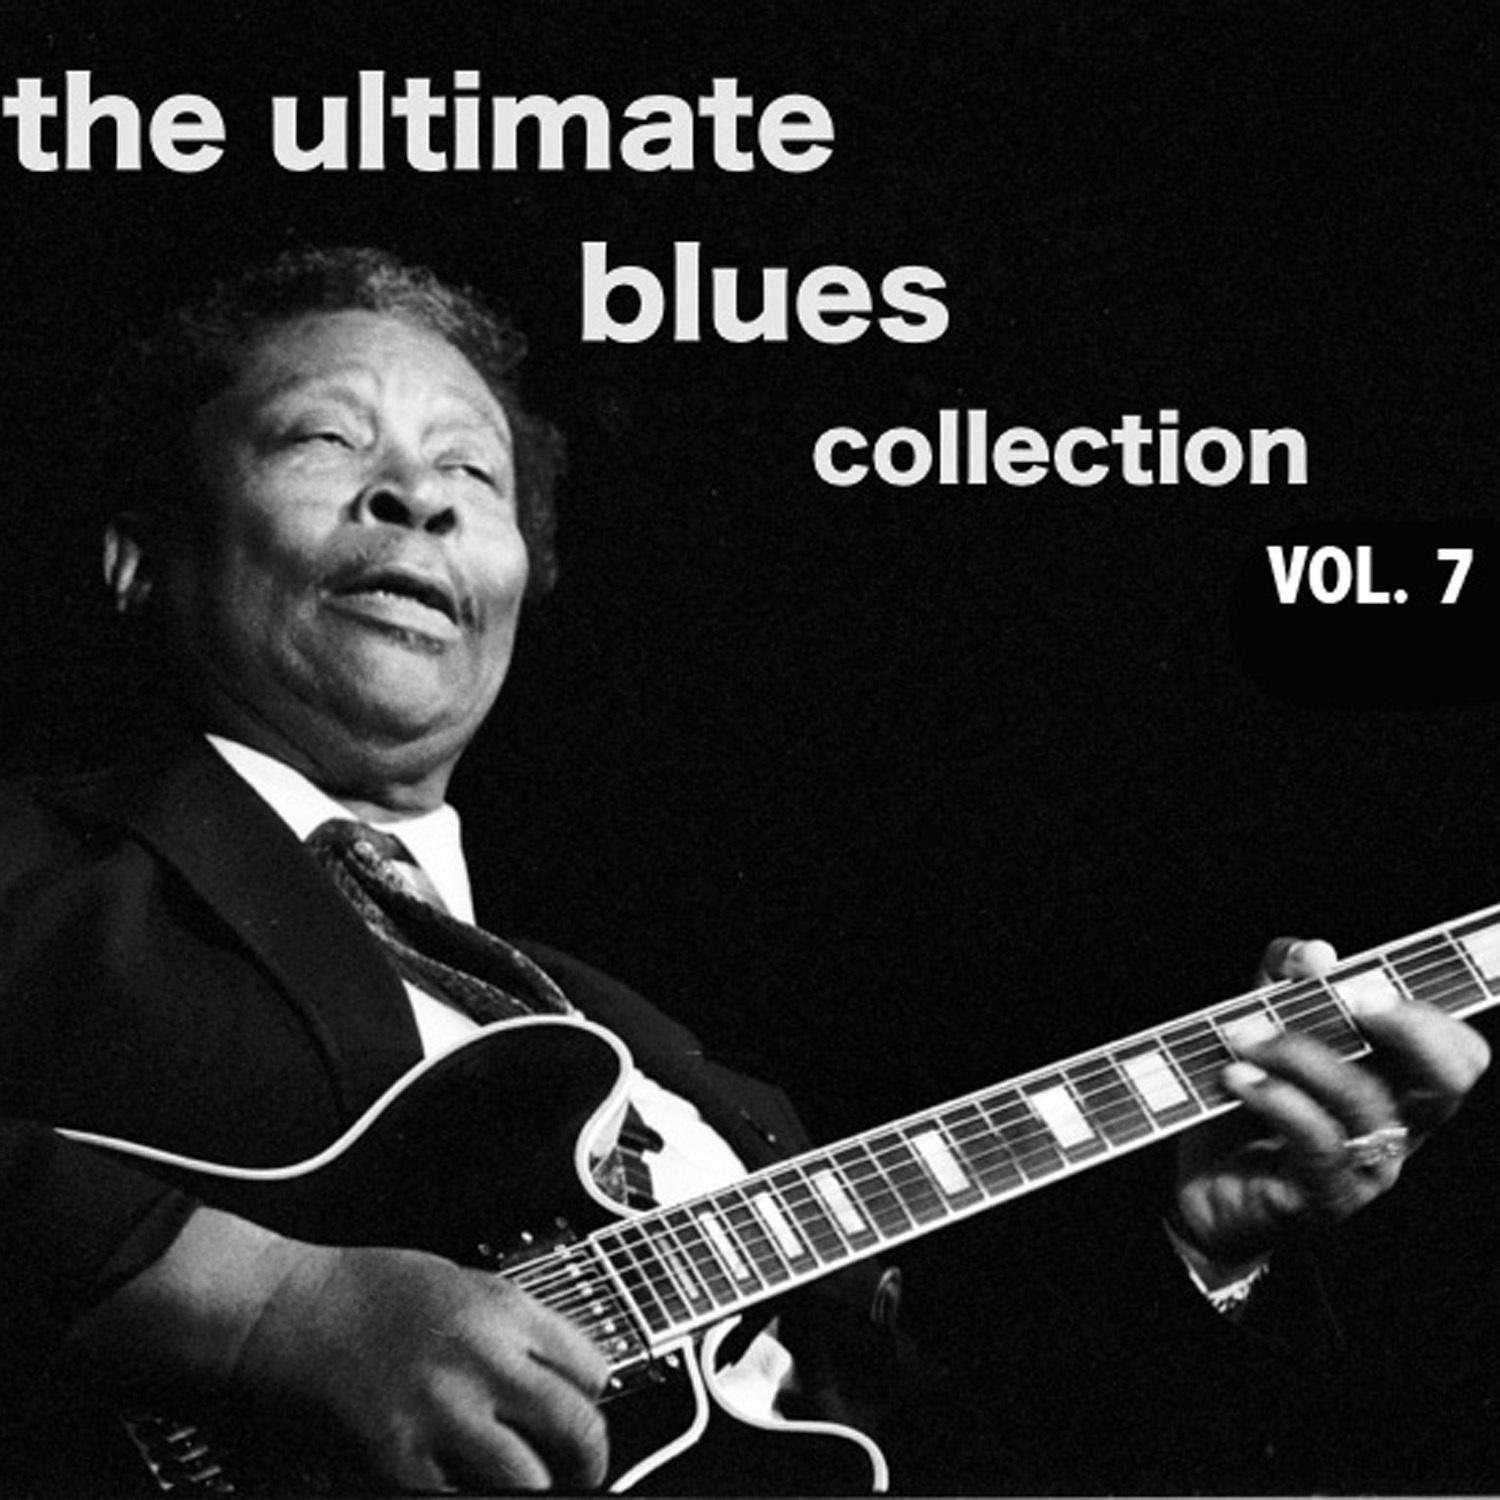 The Ultimate Blues Collection, Vol. 7